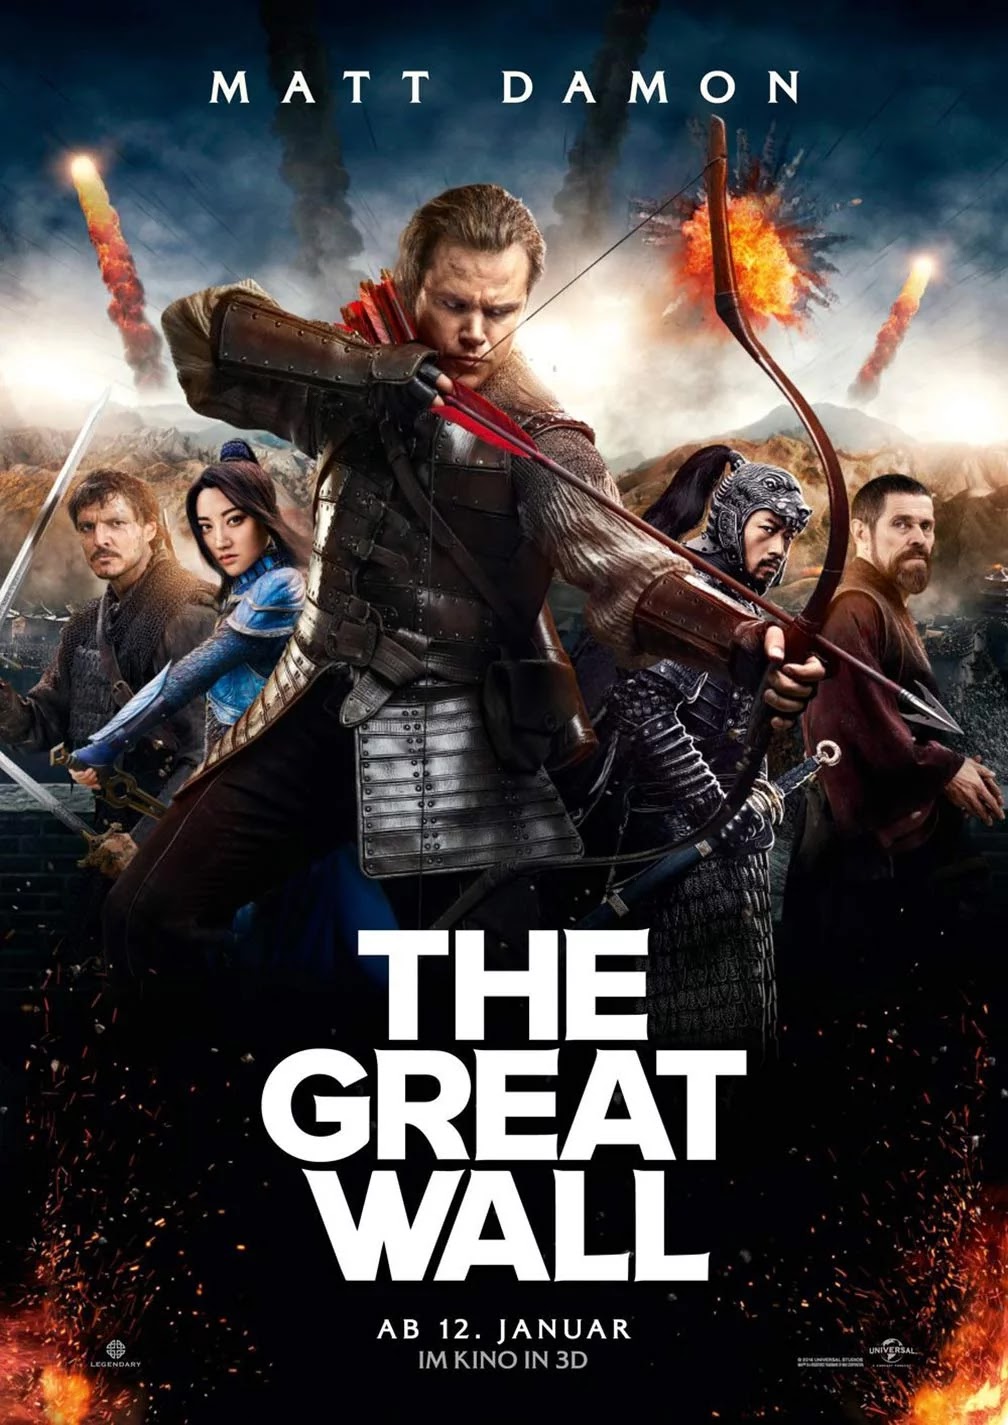 The Great Wall 16 Full Movie Download Hd New Movie Latest Movie Hollywood Movie Bollywood Movie Horror Movie